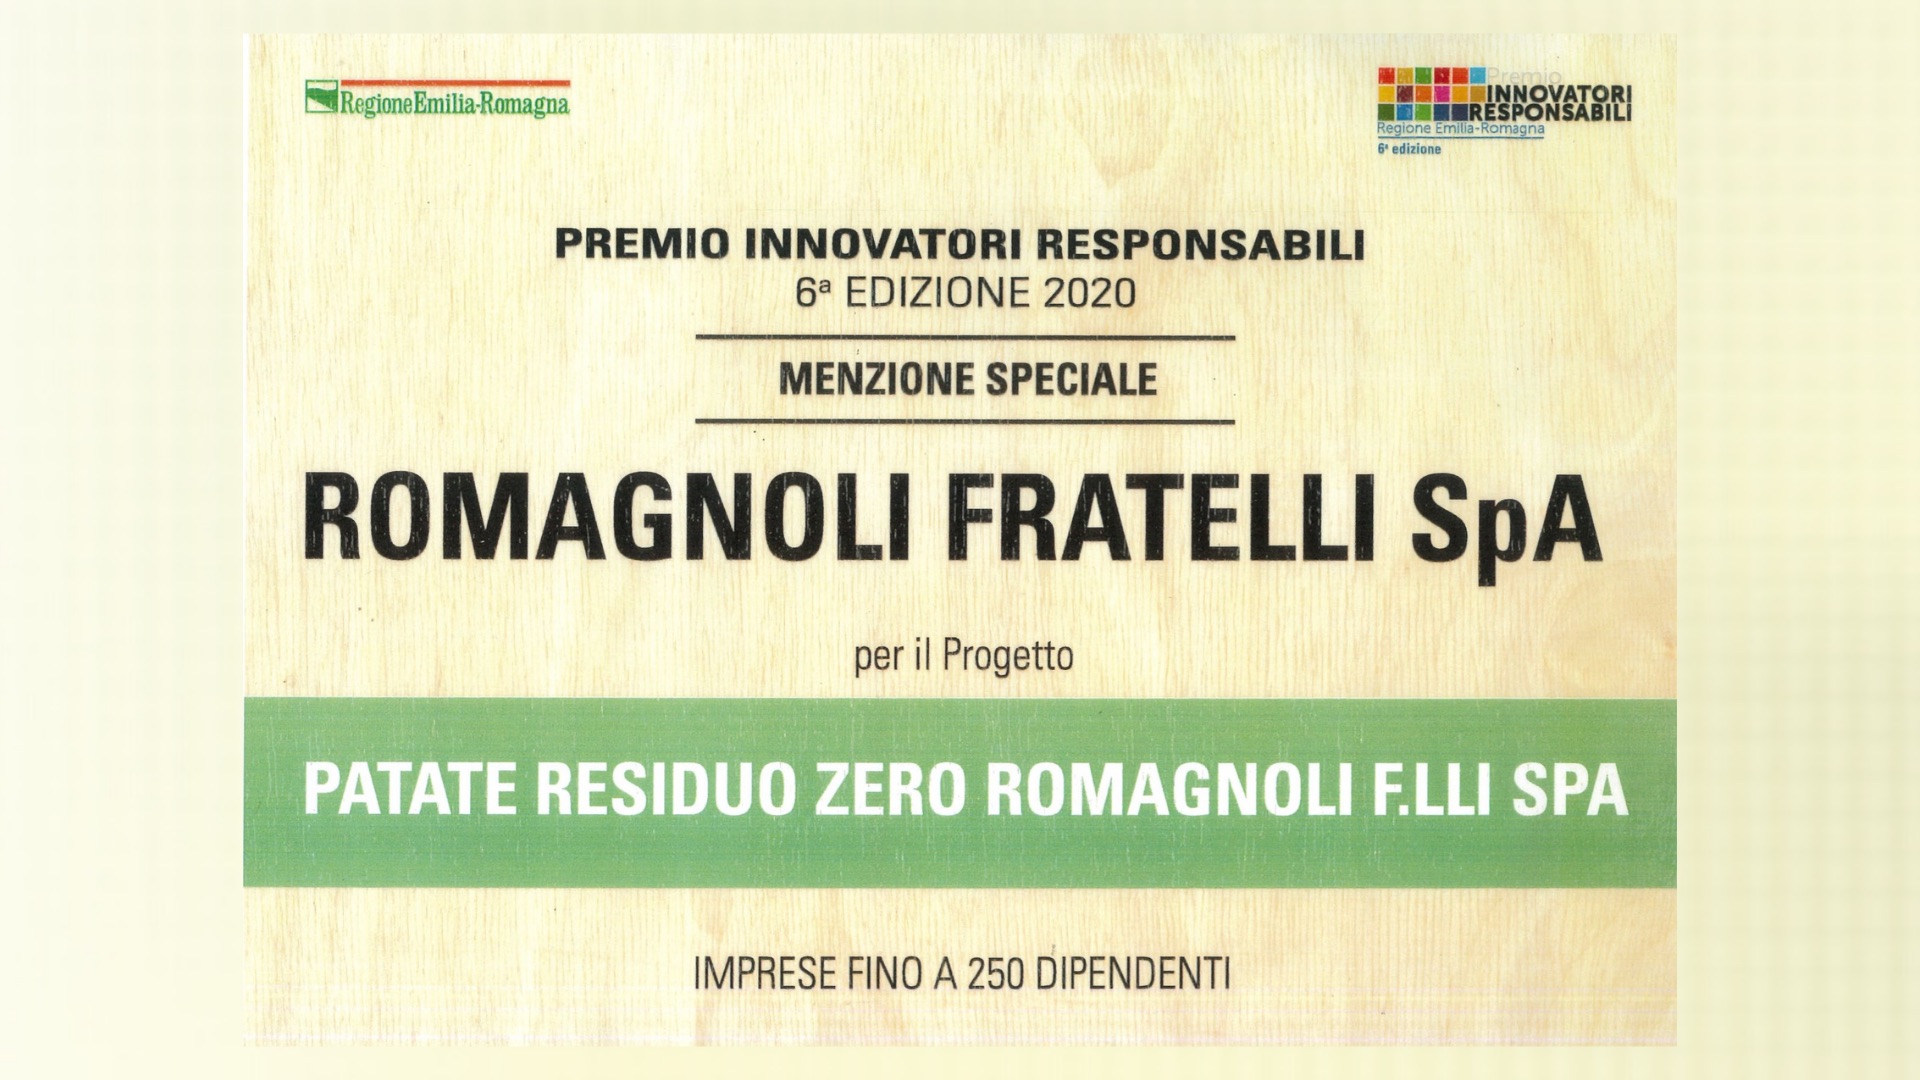 Romagnoli F.lli Spa gets a special mention at the Responsible Innovators Awards 